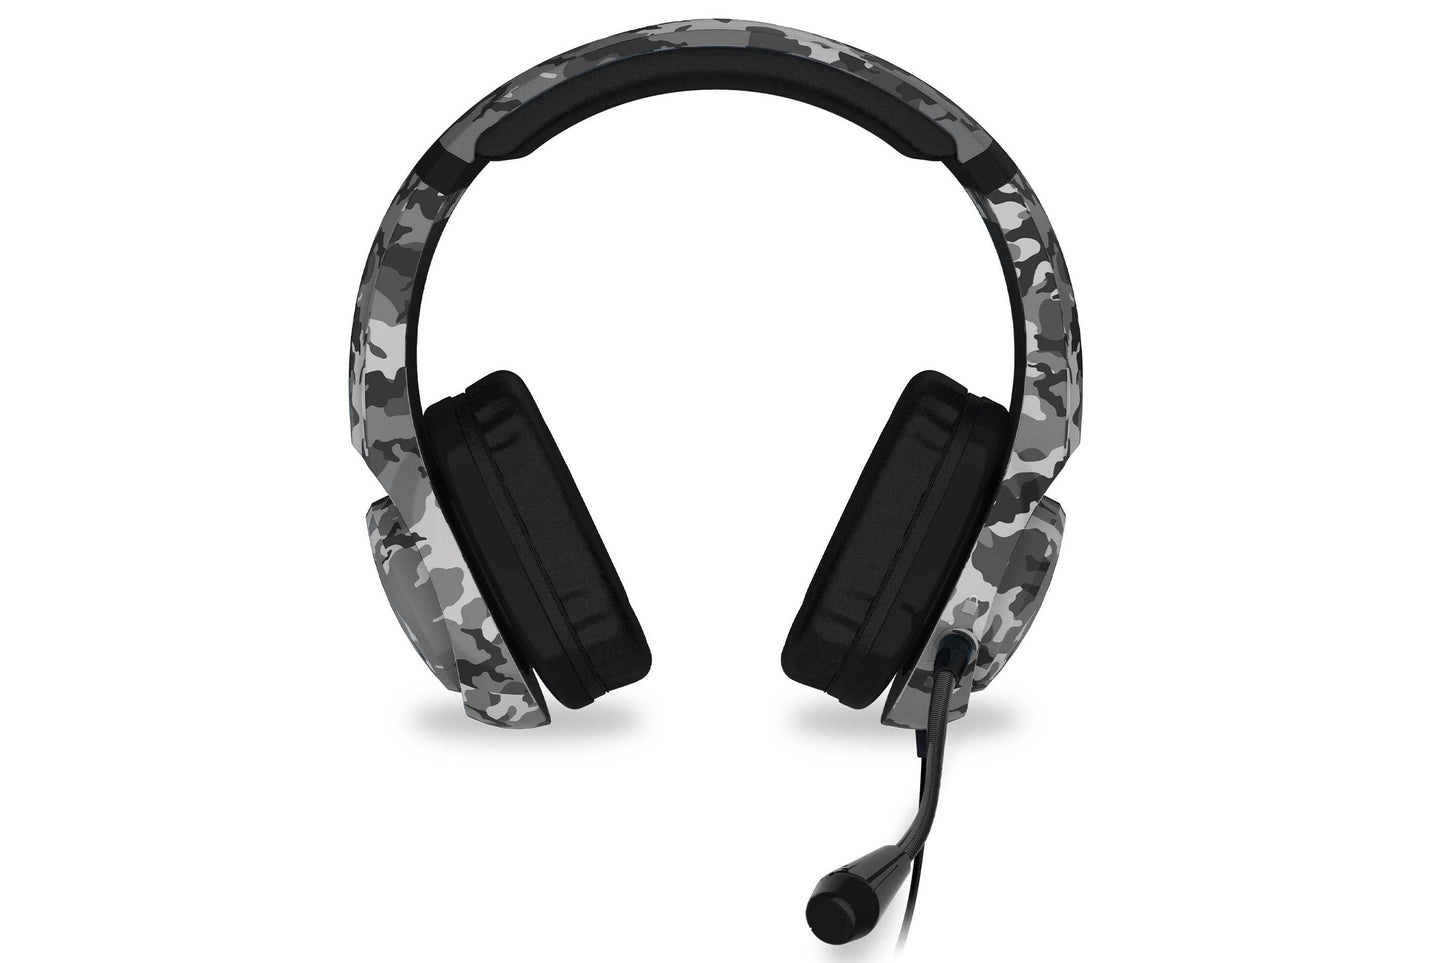 Stealth XP Commander Gaming Headset - Urban Camouflage - maplin.co.uk